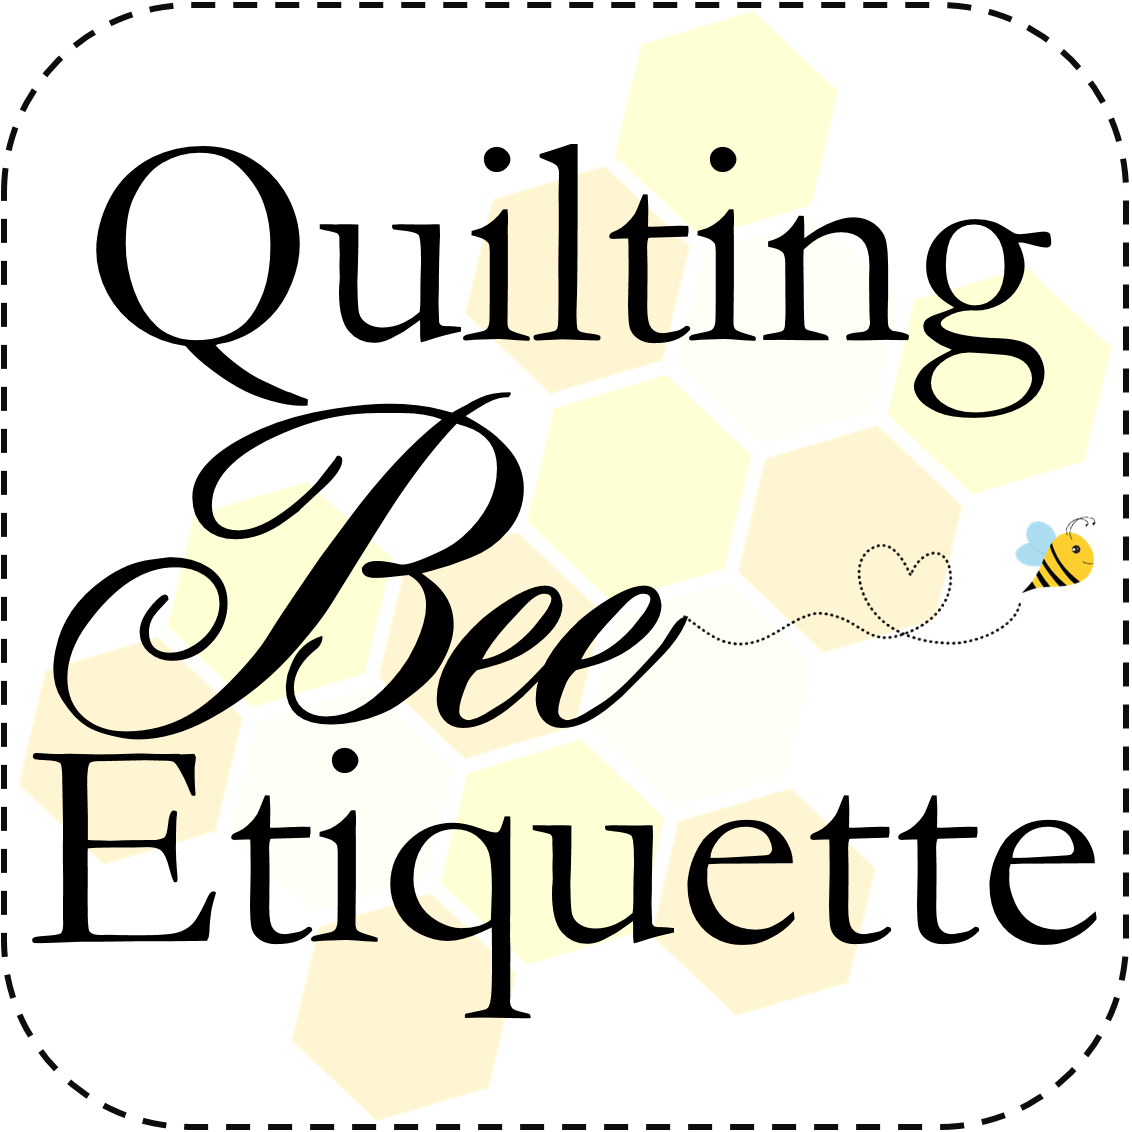 How To Bee – Quilting Bee Etiquette